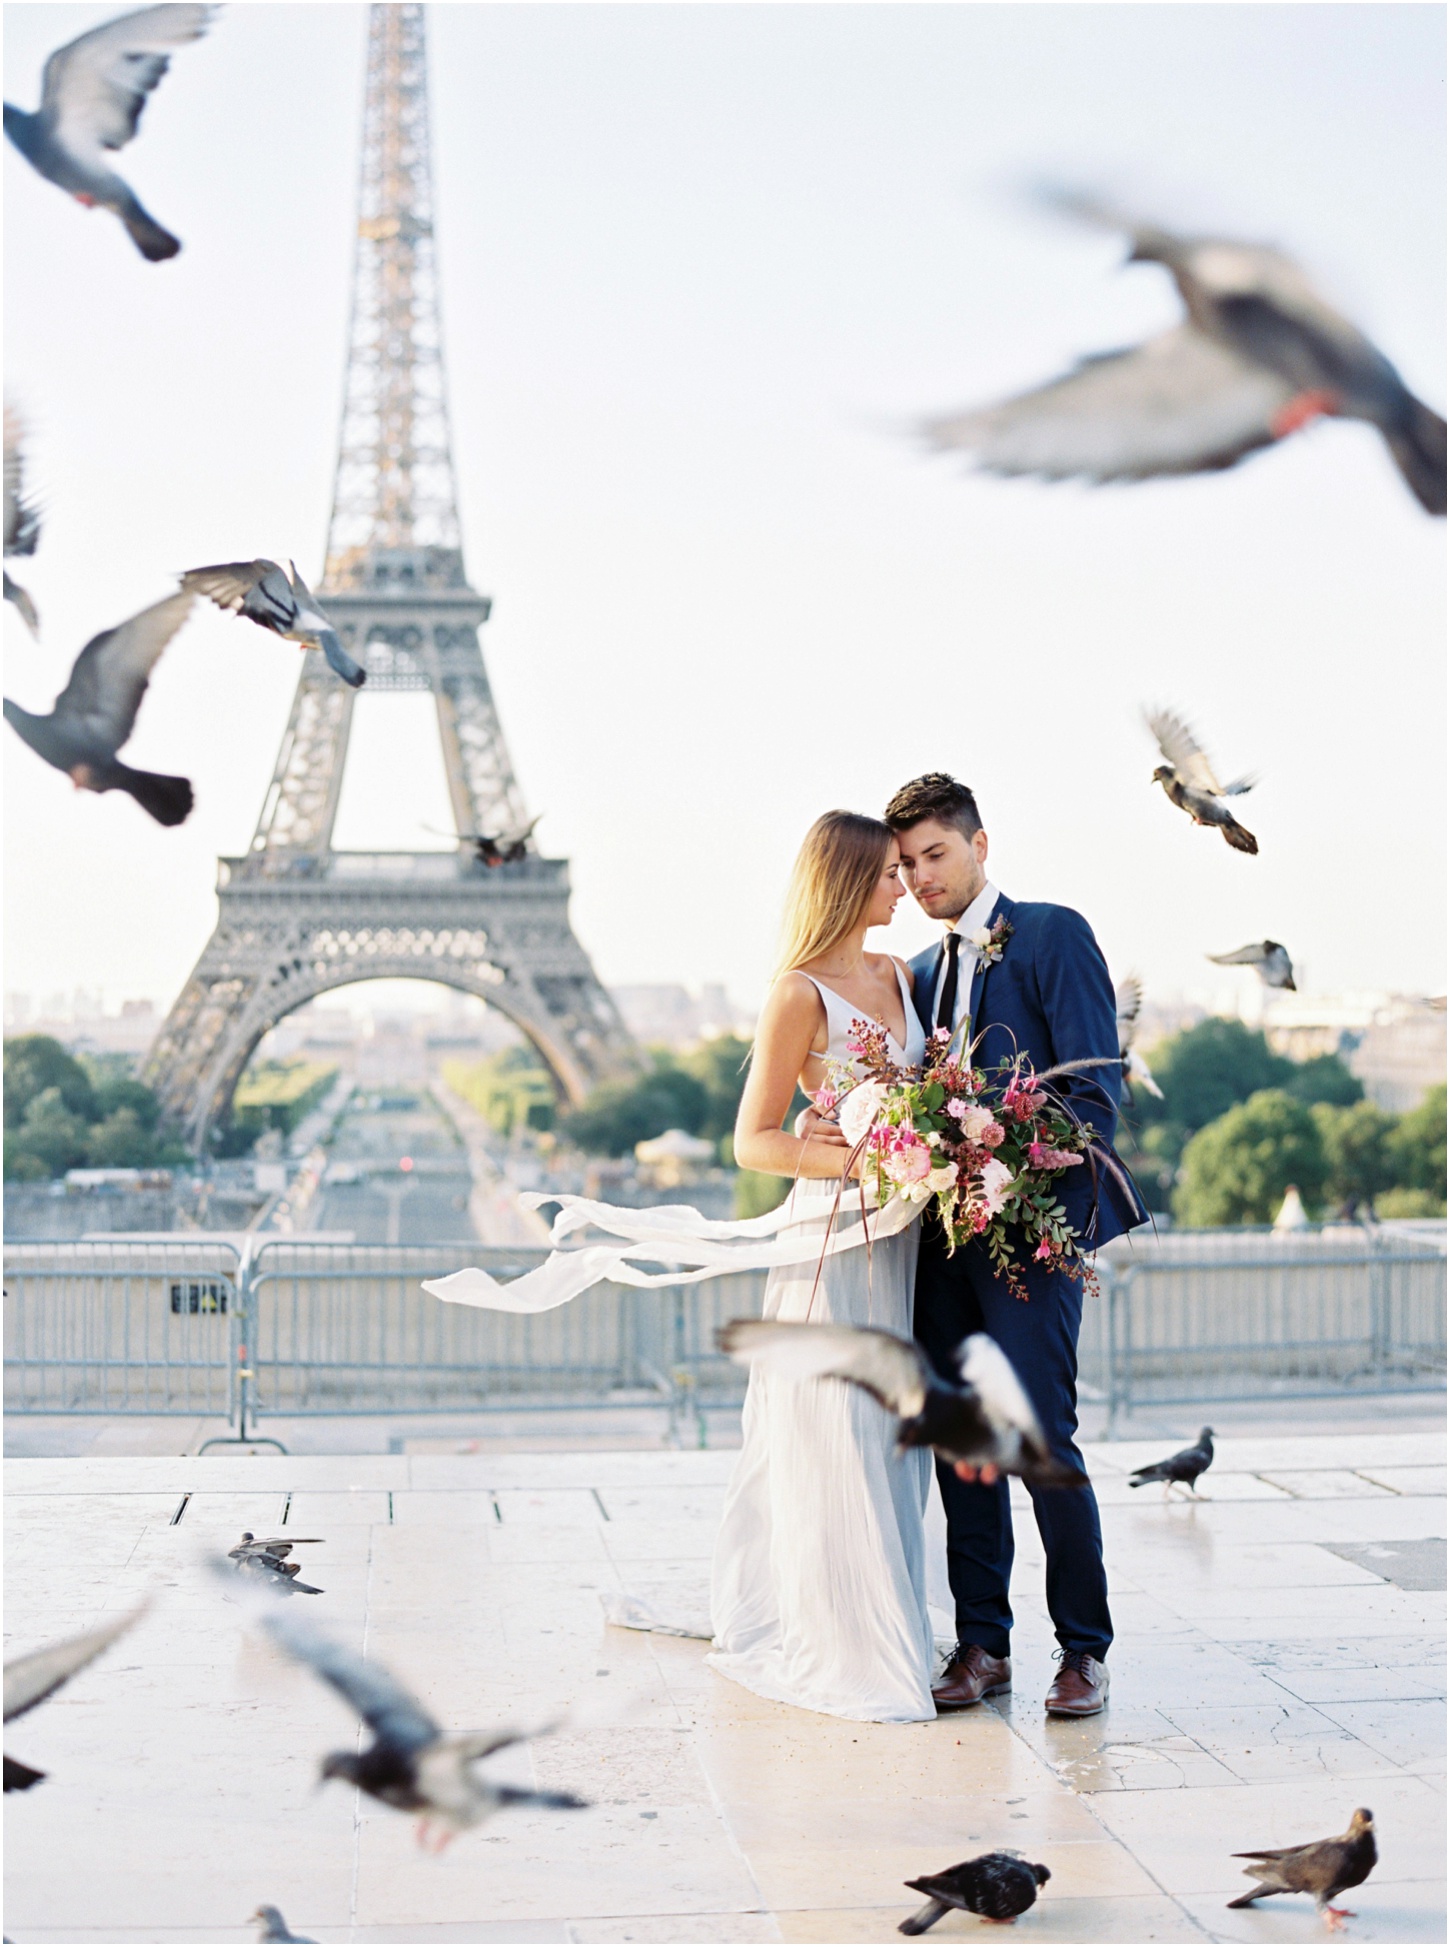 We woke up at dawn for a sunrise wedding editorial shoot at the Eiffel Tower! It was a beautiful collaboration between Leanne Marshall, Holly Carlisle, Olive Juice Press, Alice and Mae Bridal.